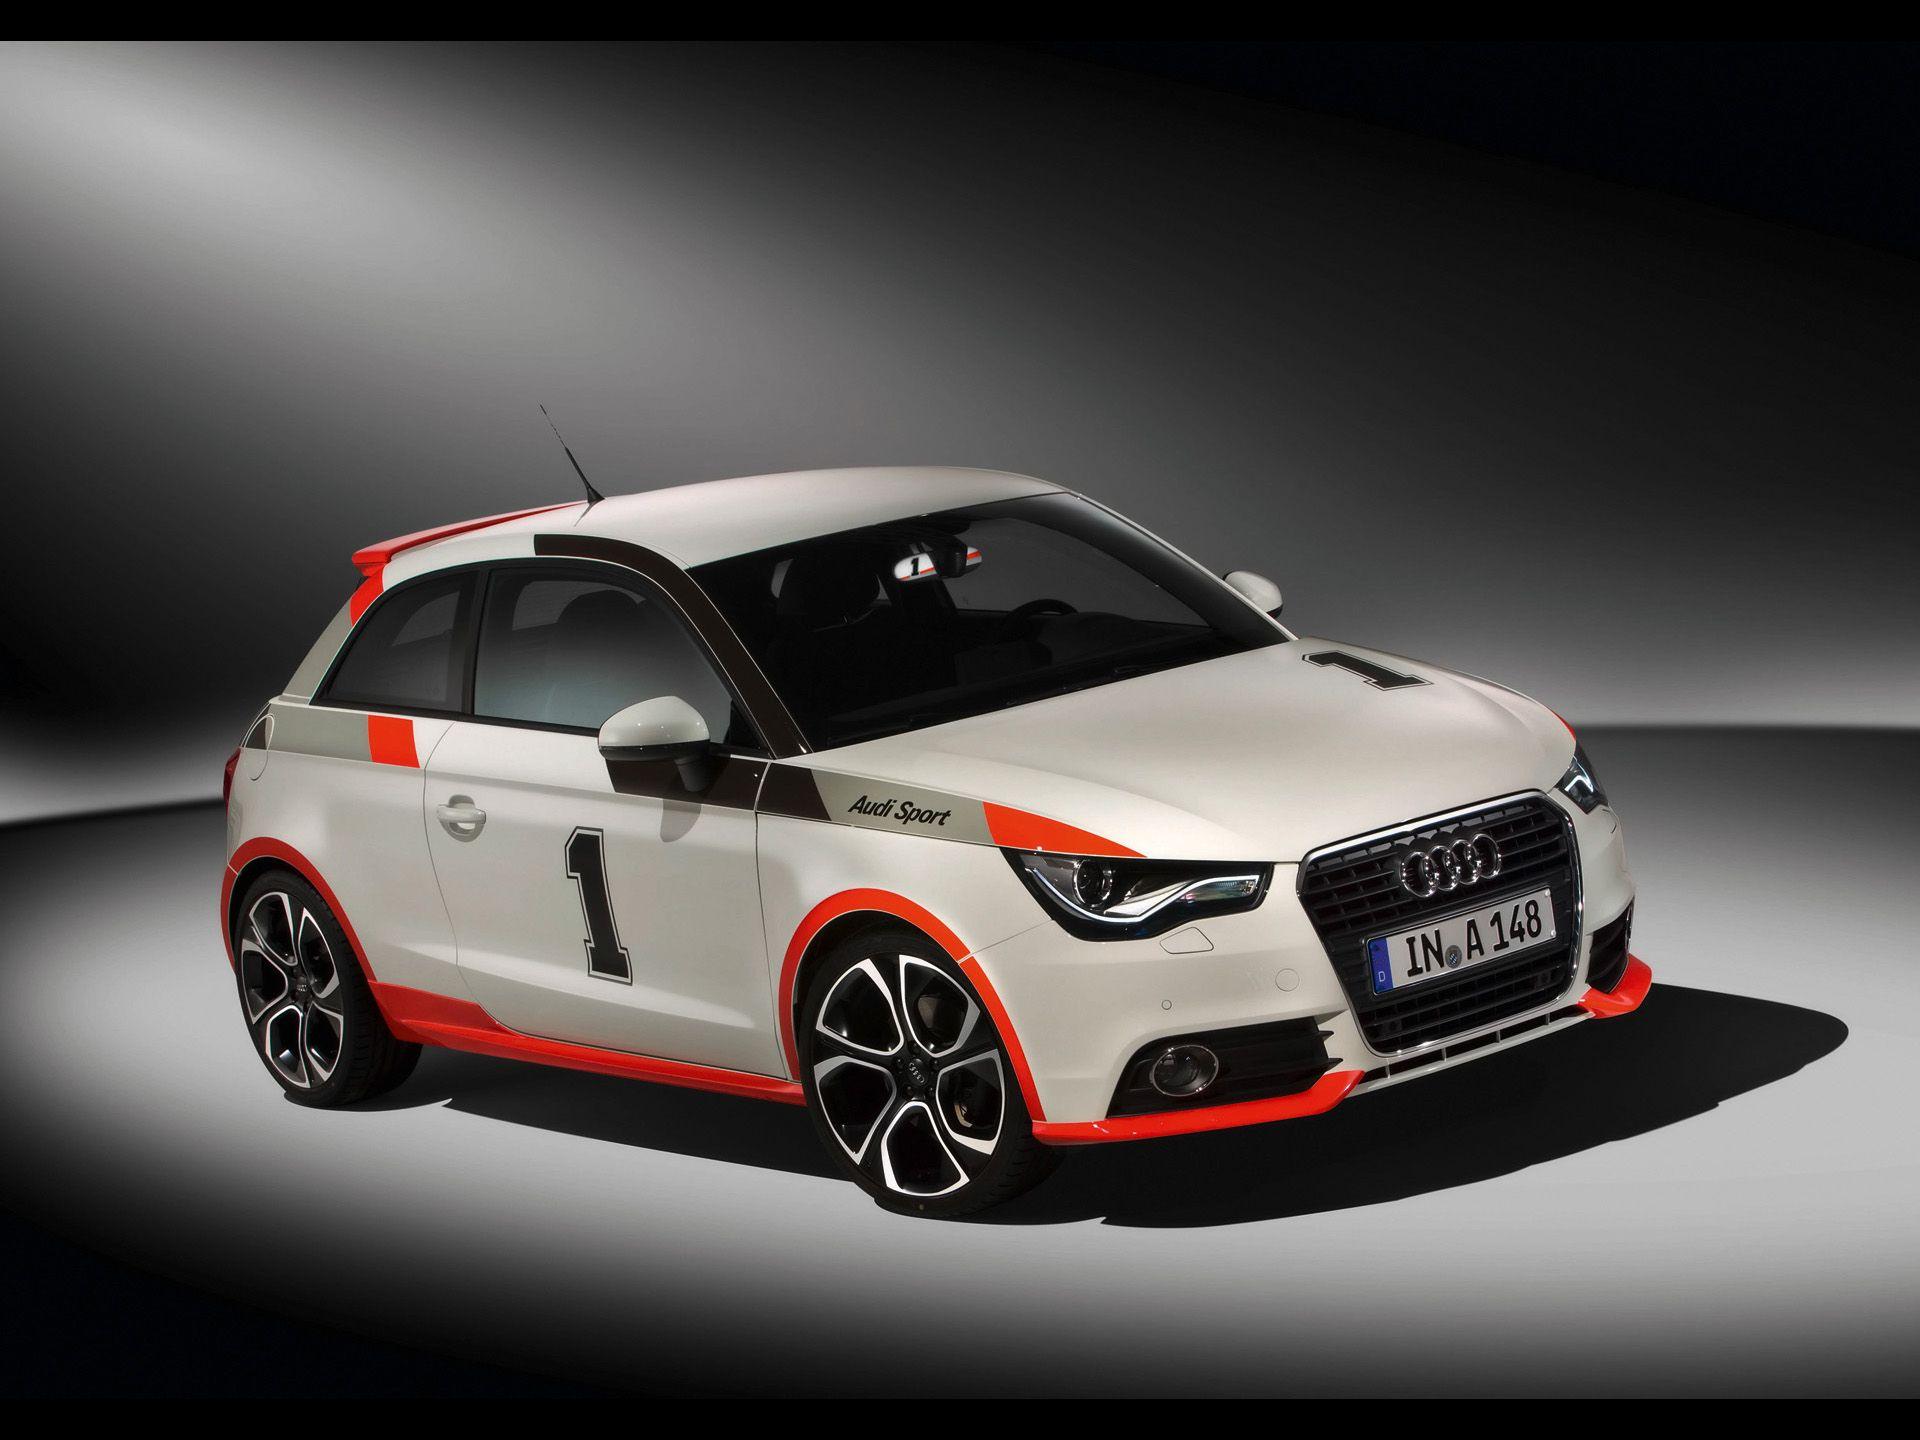 2010 Audi A1 Worthersee Tour